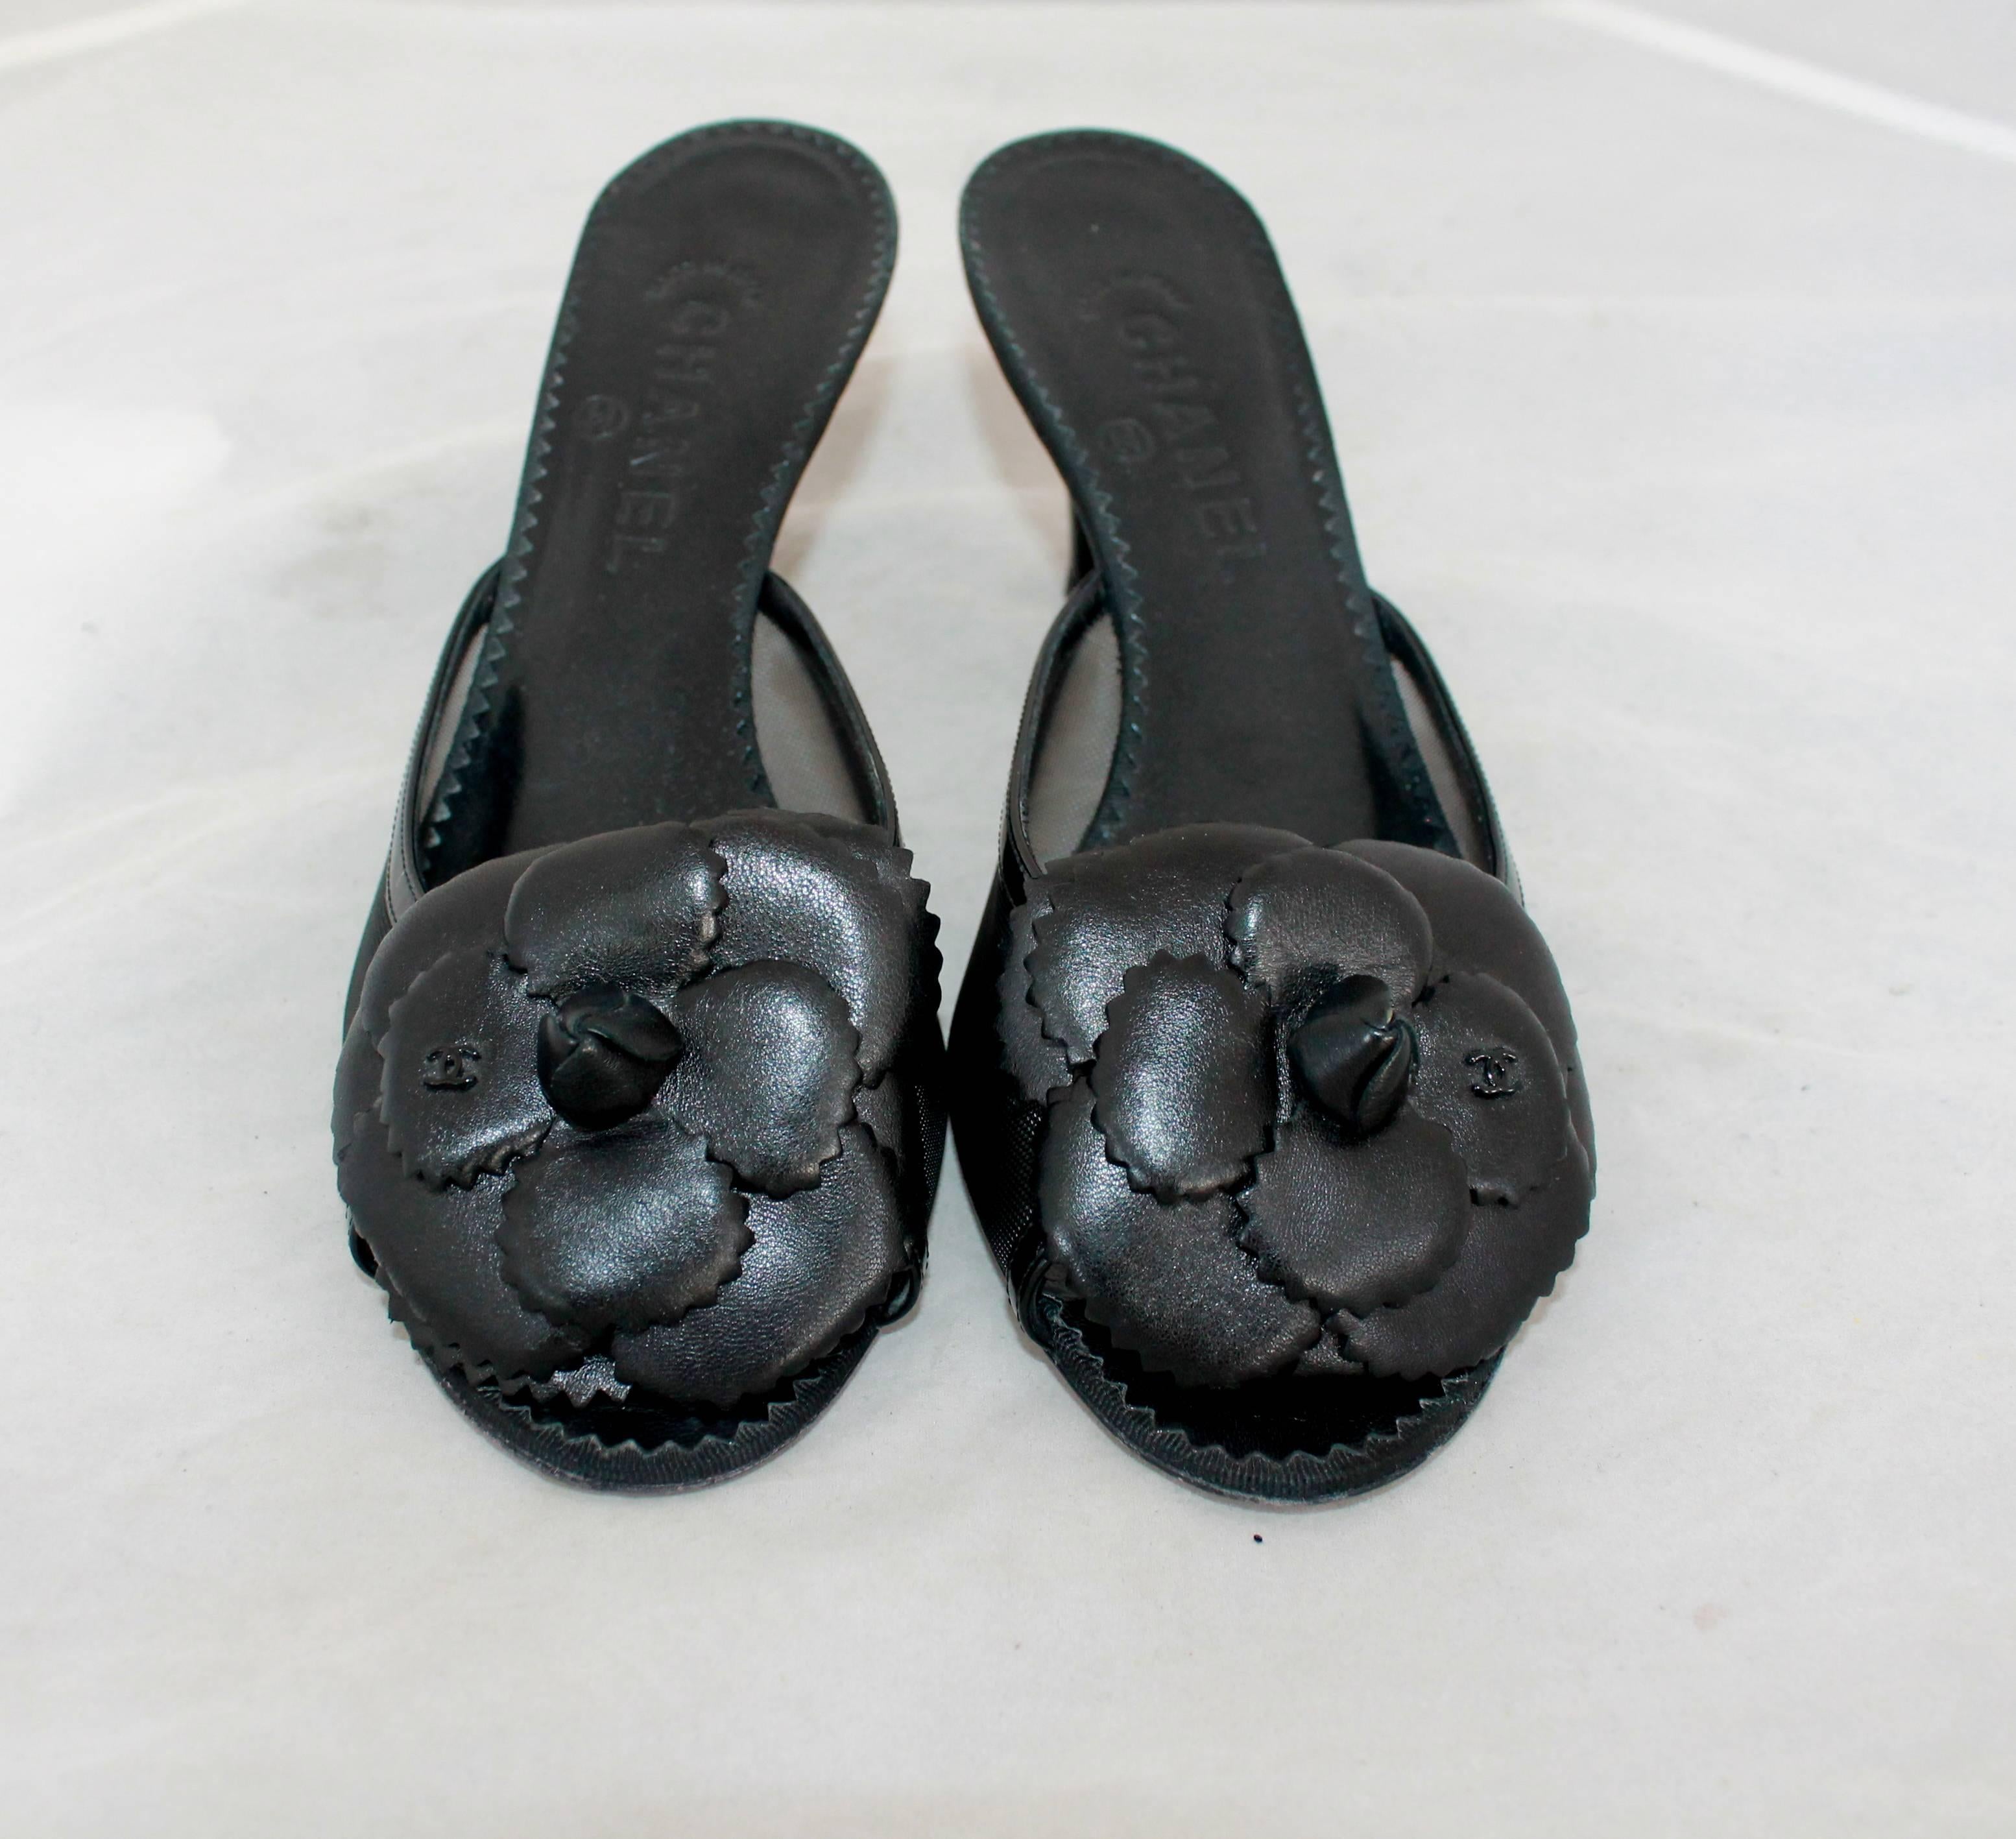 Chanel Black Mesh Slides w/ Patent Trim & Leather Camellia - 39.5.  These mesh slides are in excellent condition with some wear on the sole.  Each shoe has a black leather Camellia with the 